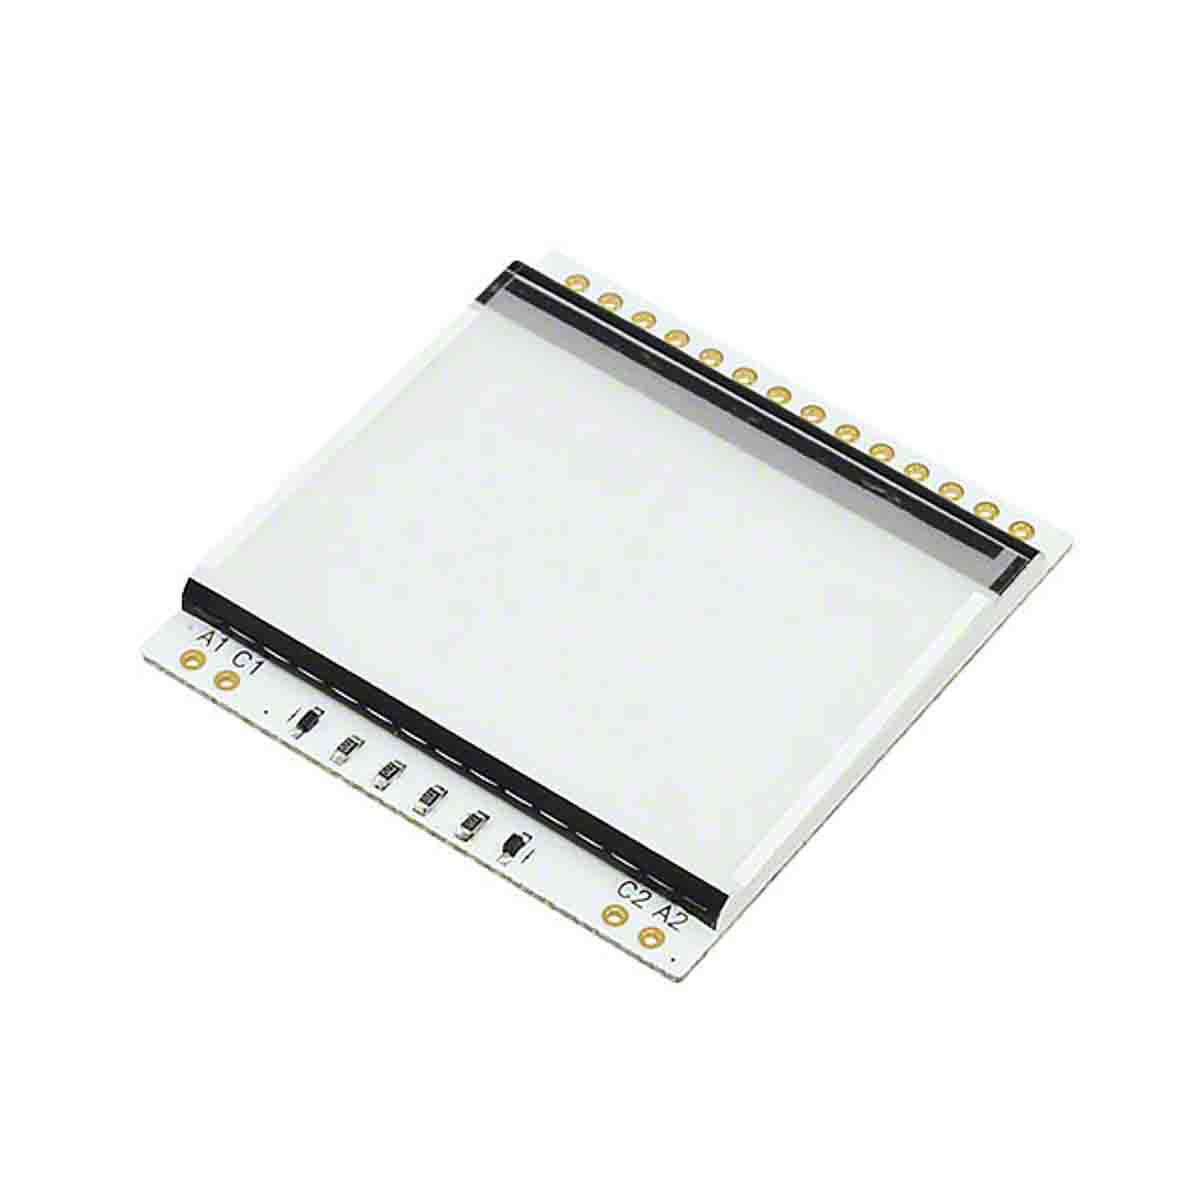 Display Visions White Display Backlight, LED 39 x 41mm